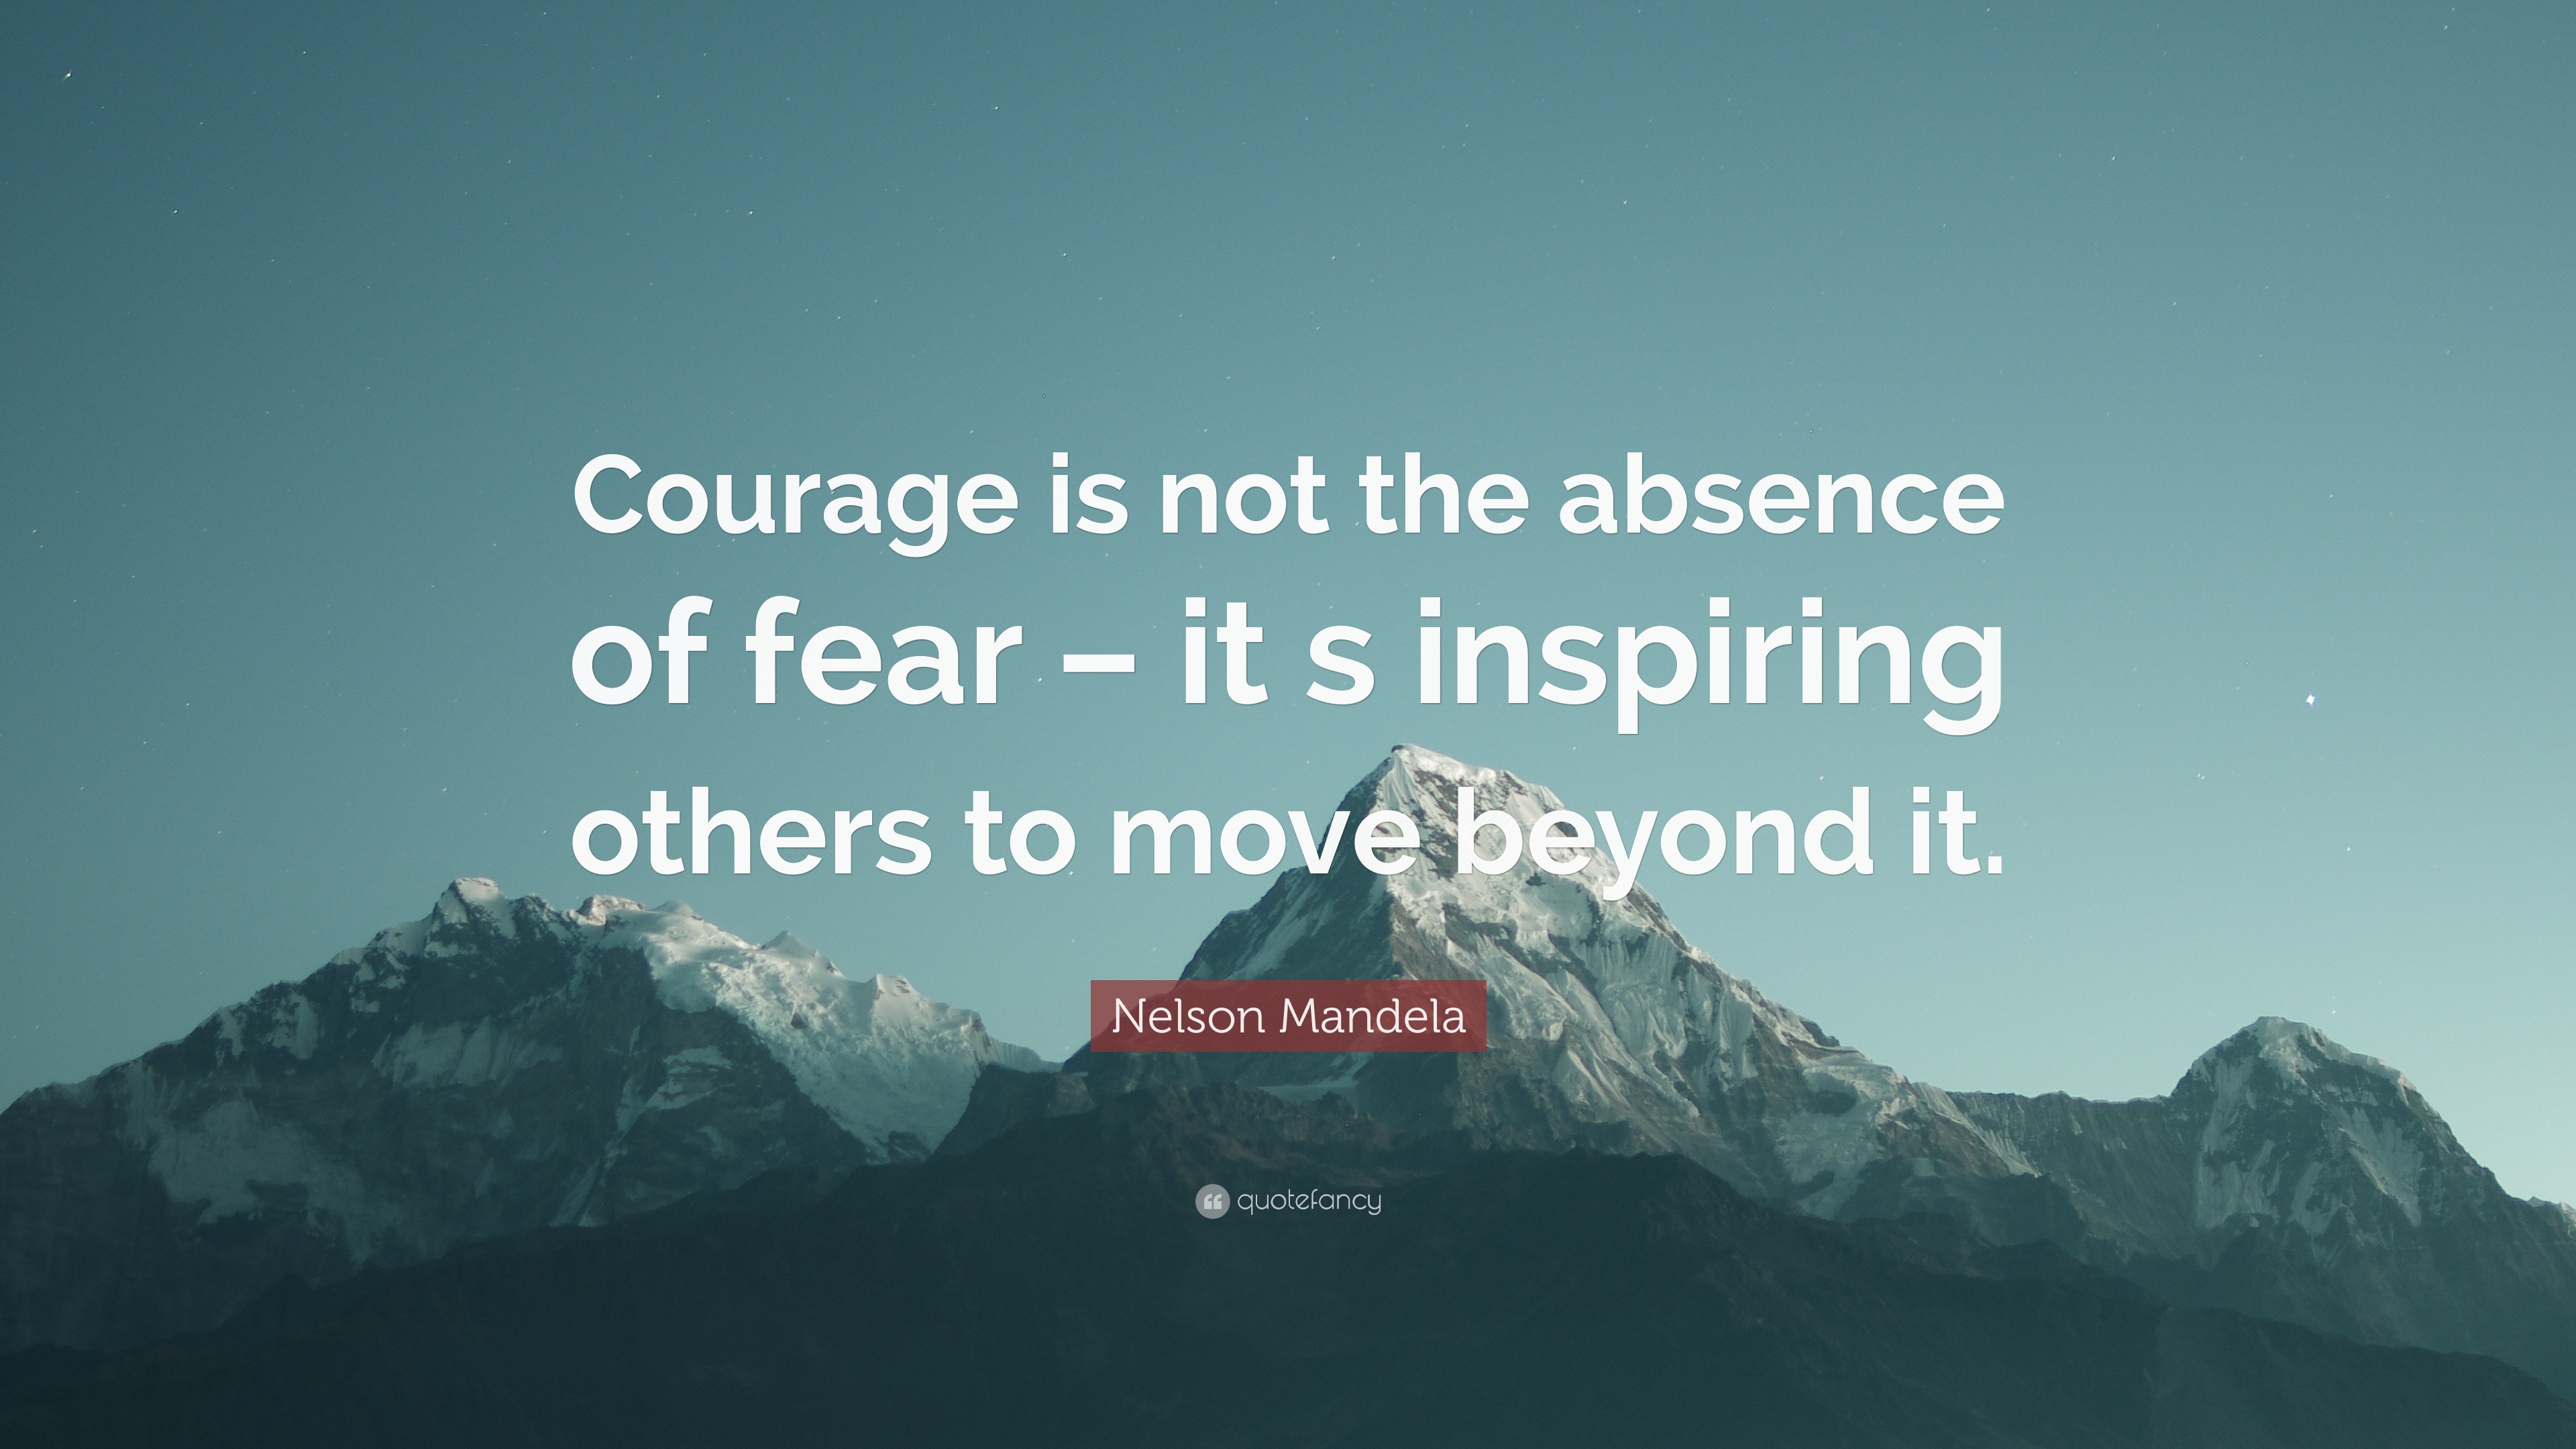 Nelson Mandela Quote: “Courage is not the absence of fear – it s ...